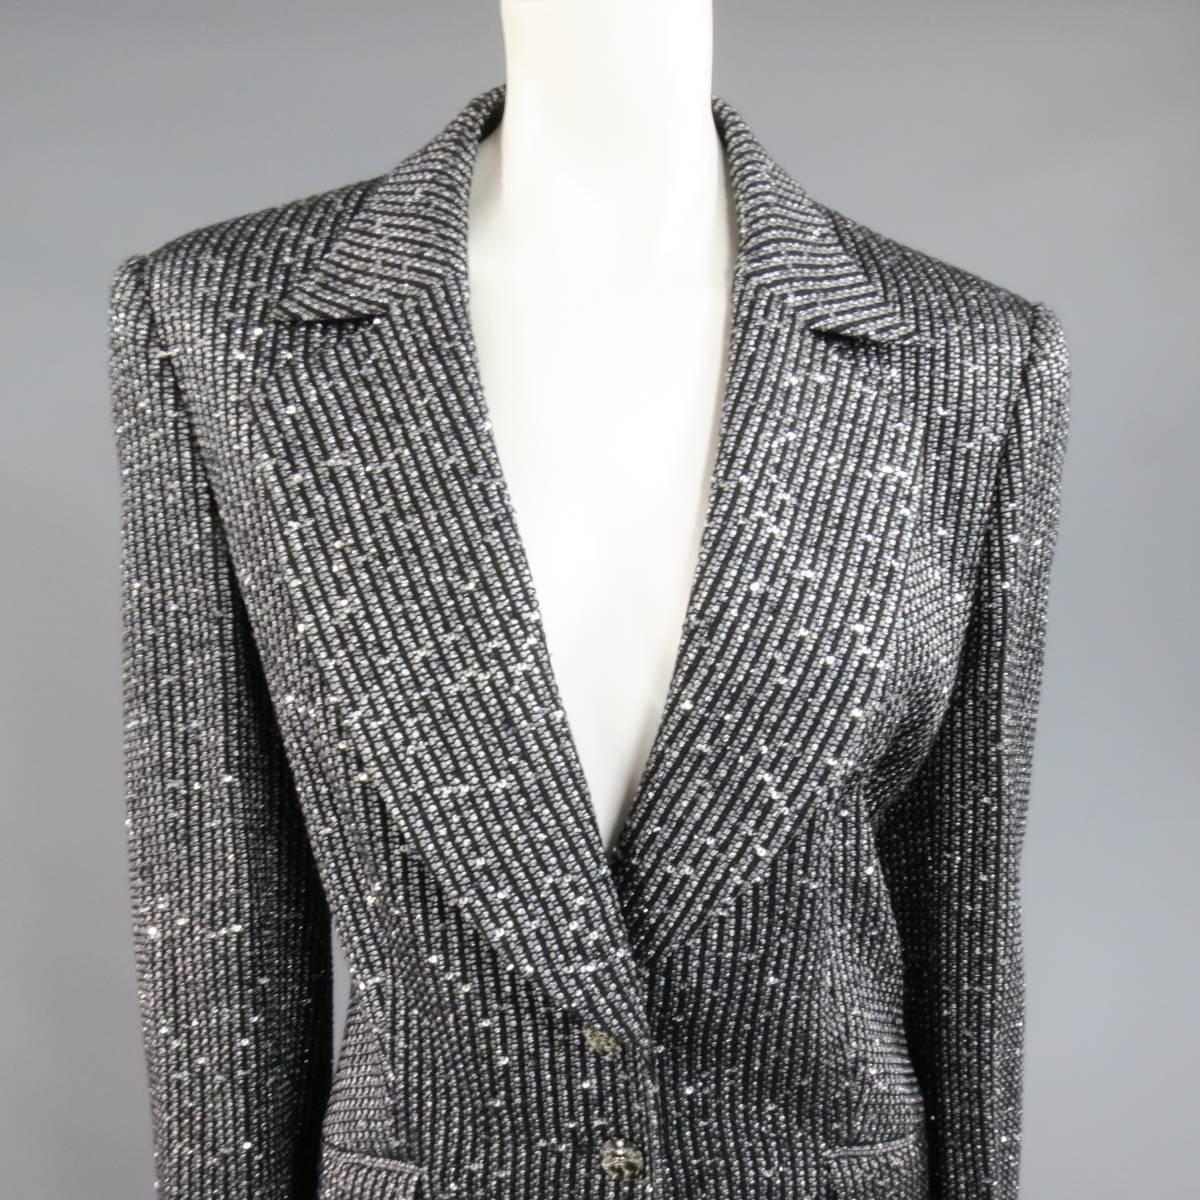 This gorgeous ESACADA sport coat jacket comes in a unique black and silver metallic striped Boucle with silver sequin woven in throughout and features a wide notch lapel, single breasted three button closure with glitter gray scale tortoise 